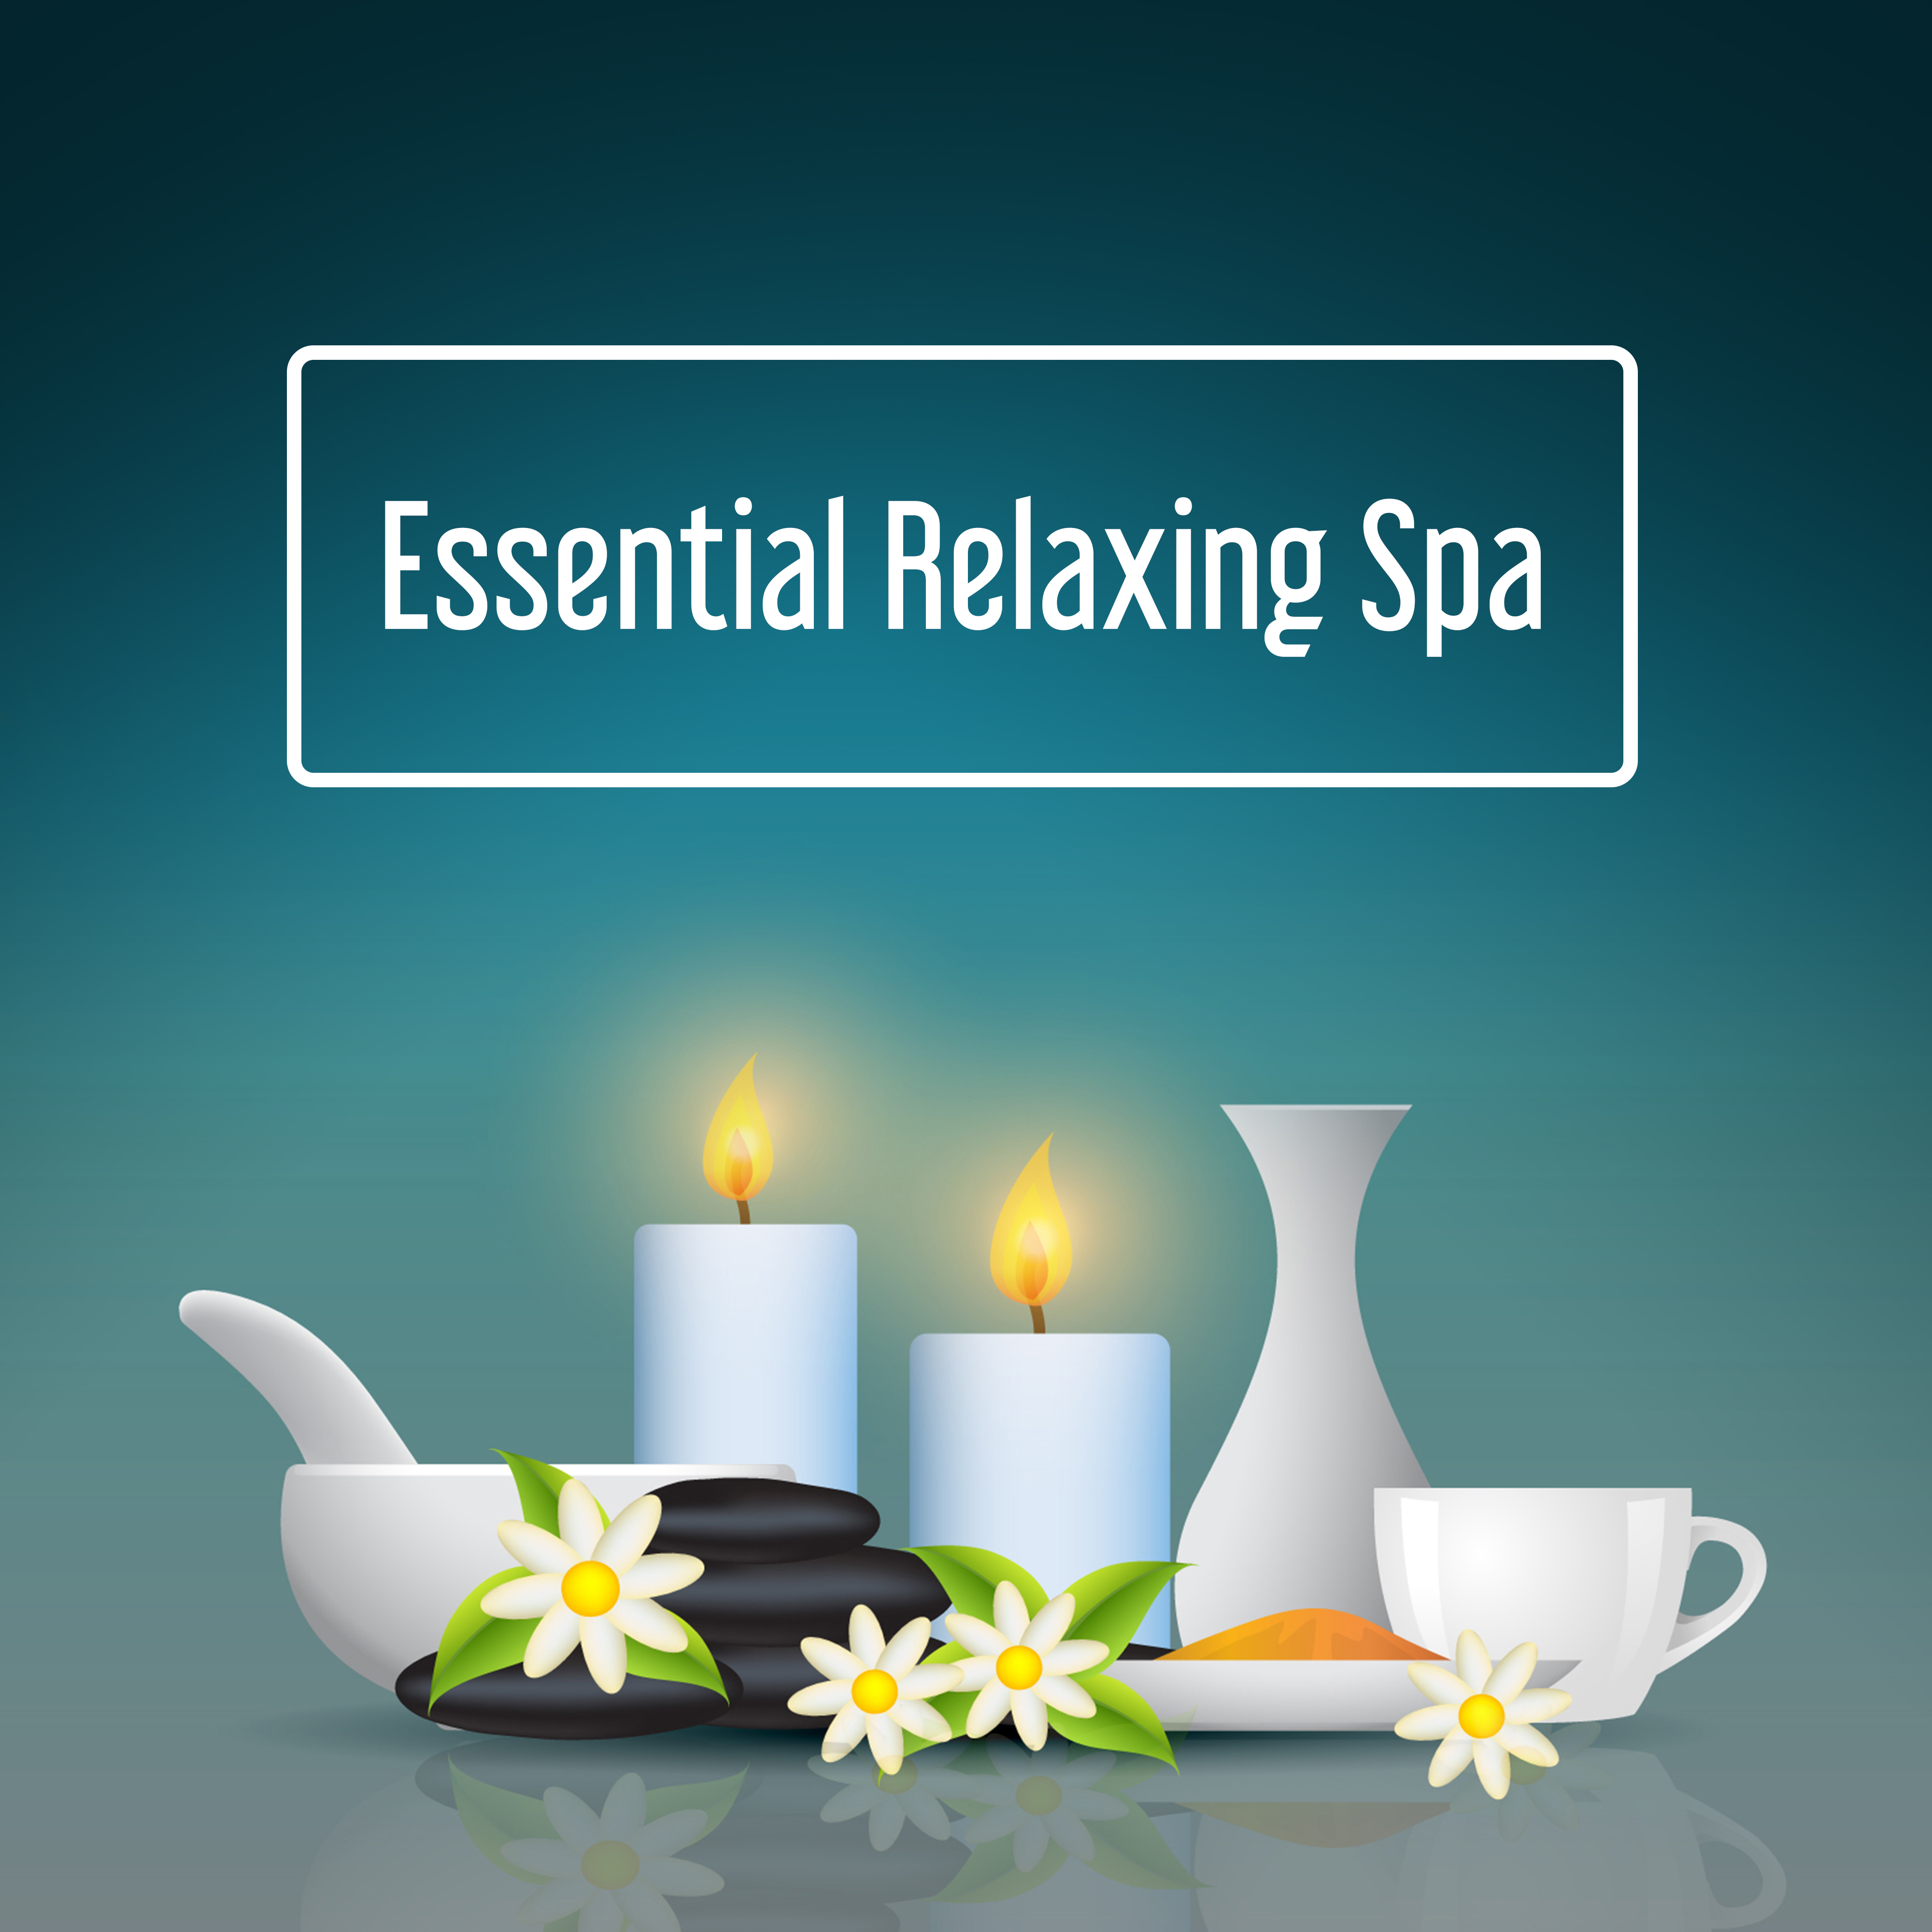 Essential Relaxing Spa